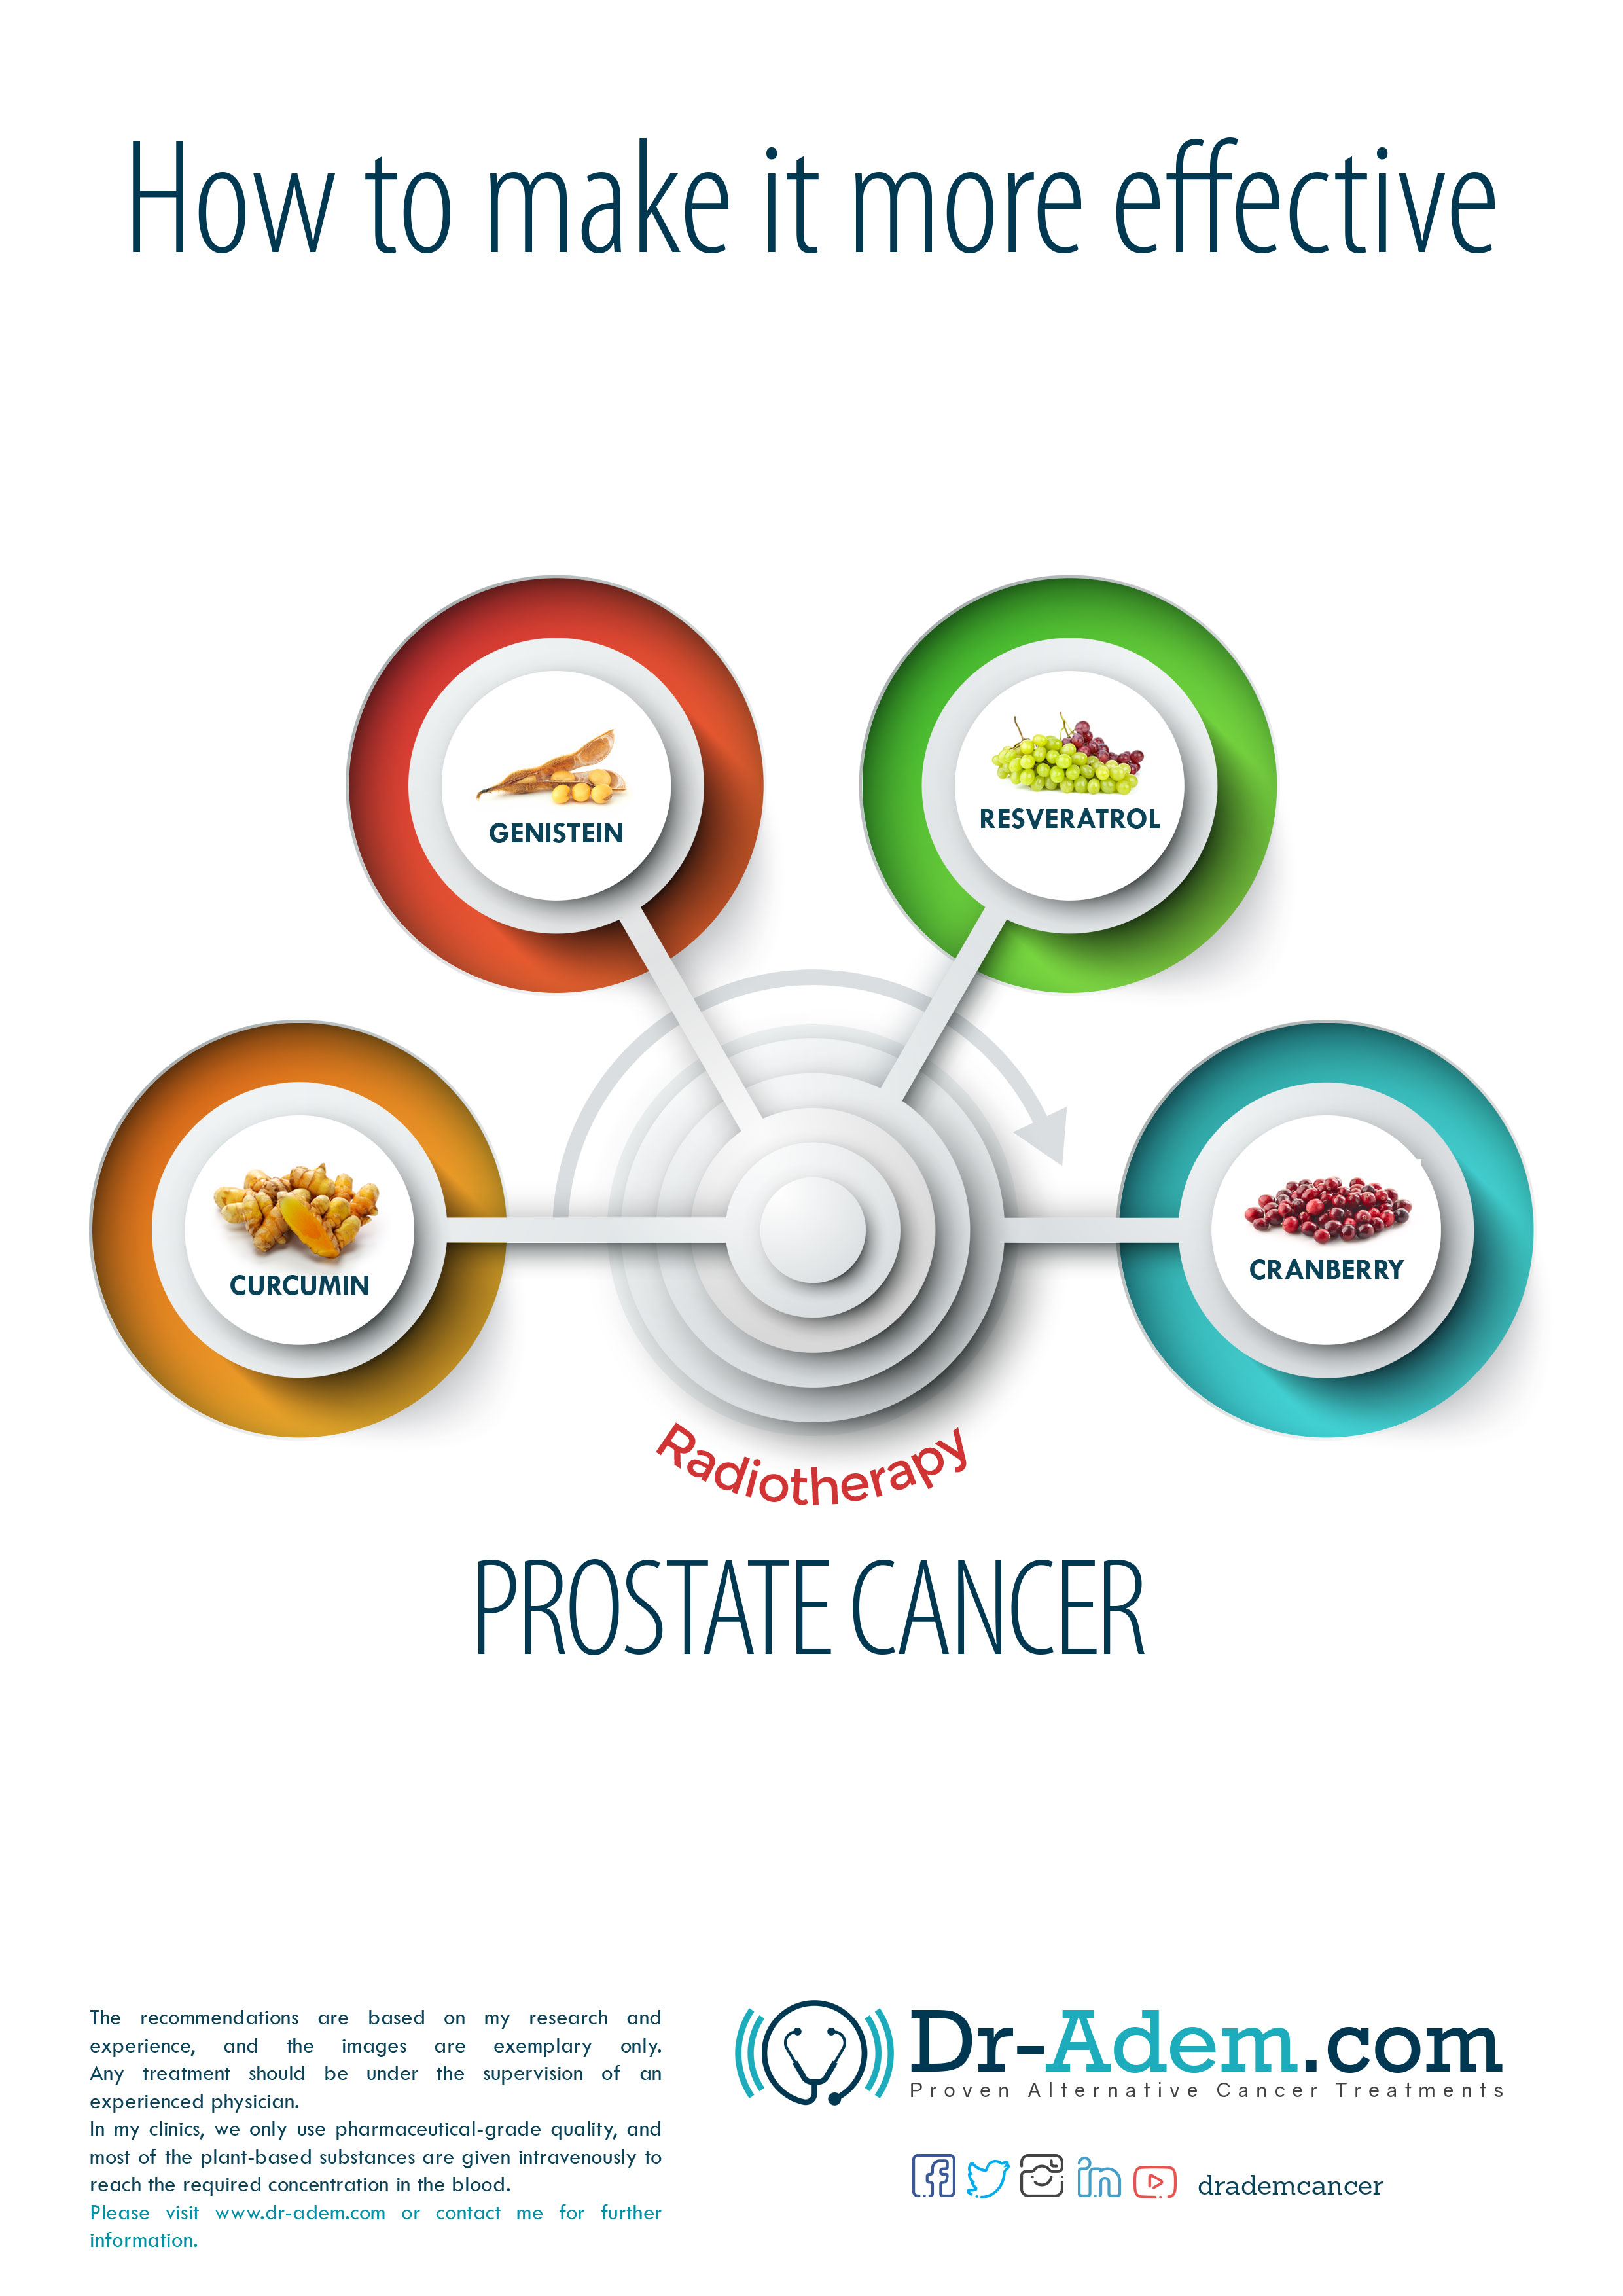 Radiotherapy For Prostate Cancer